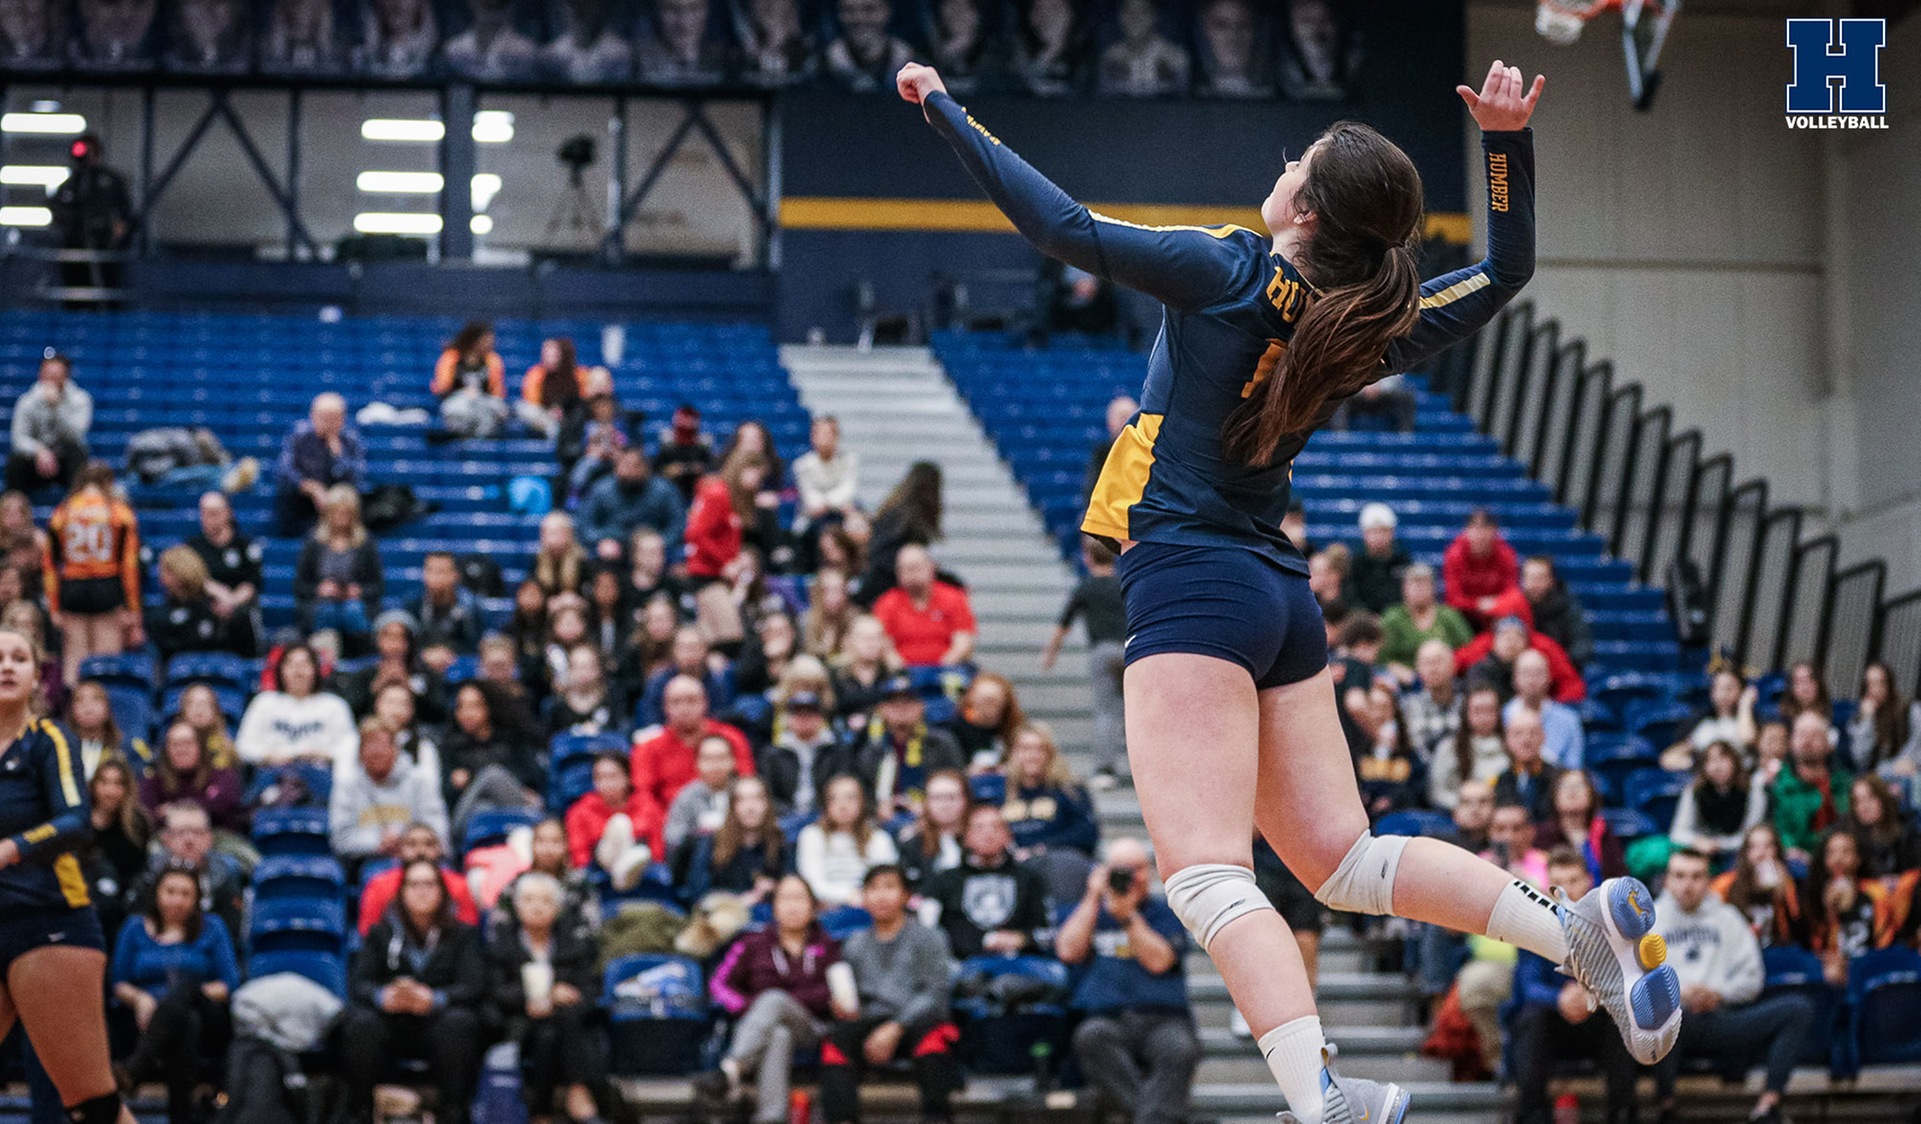 No. 15 Women's Volleyball Concludes Season With Win Over St. Clair